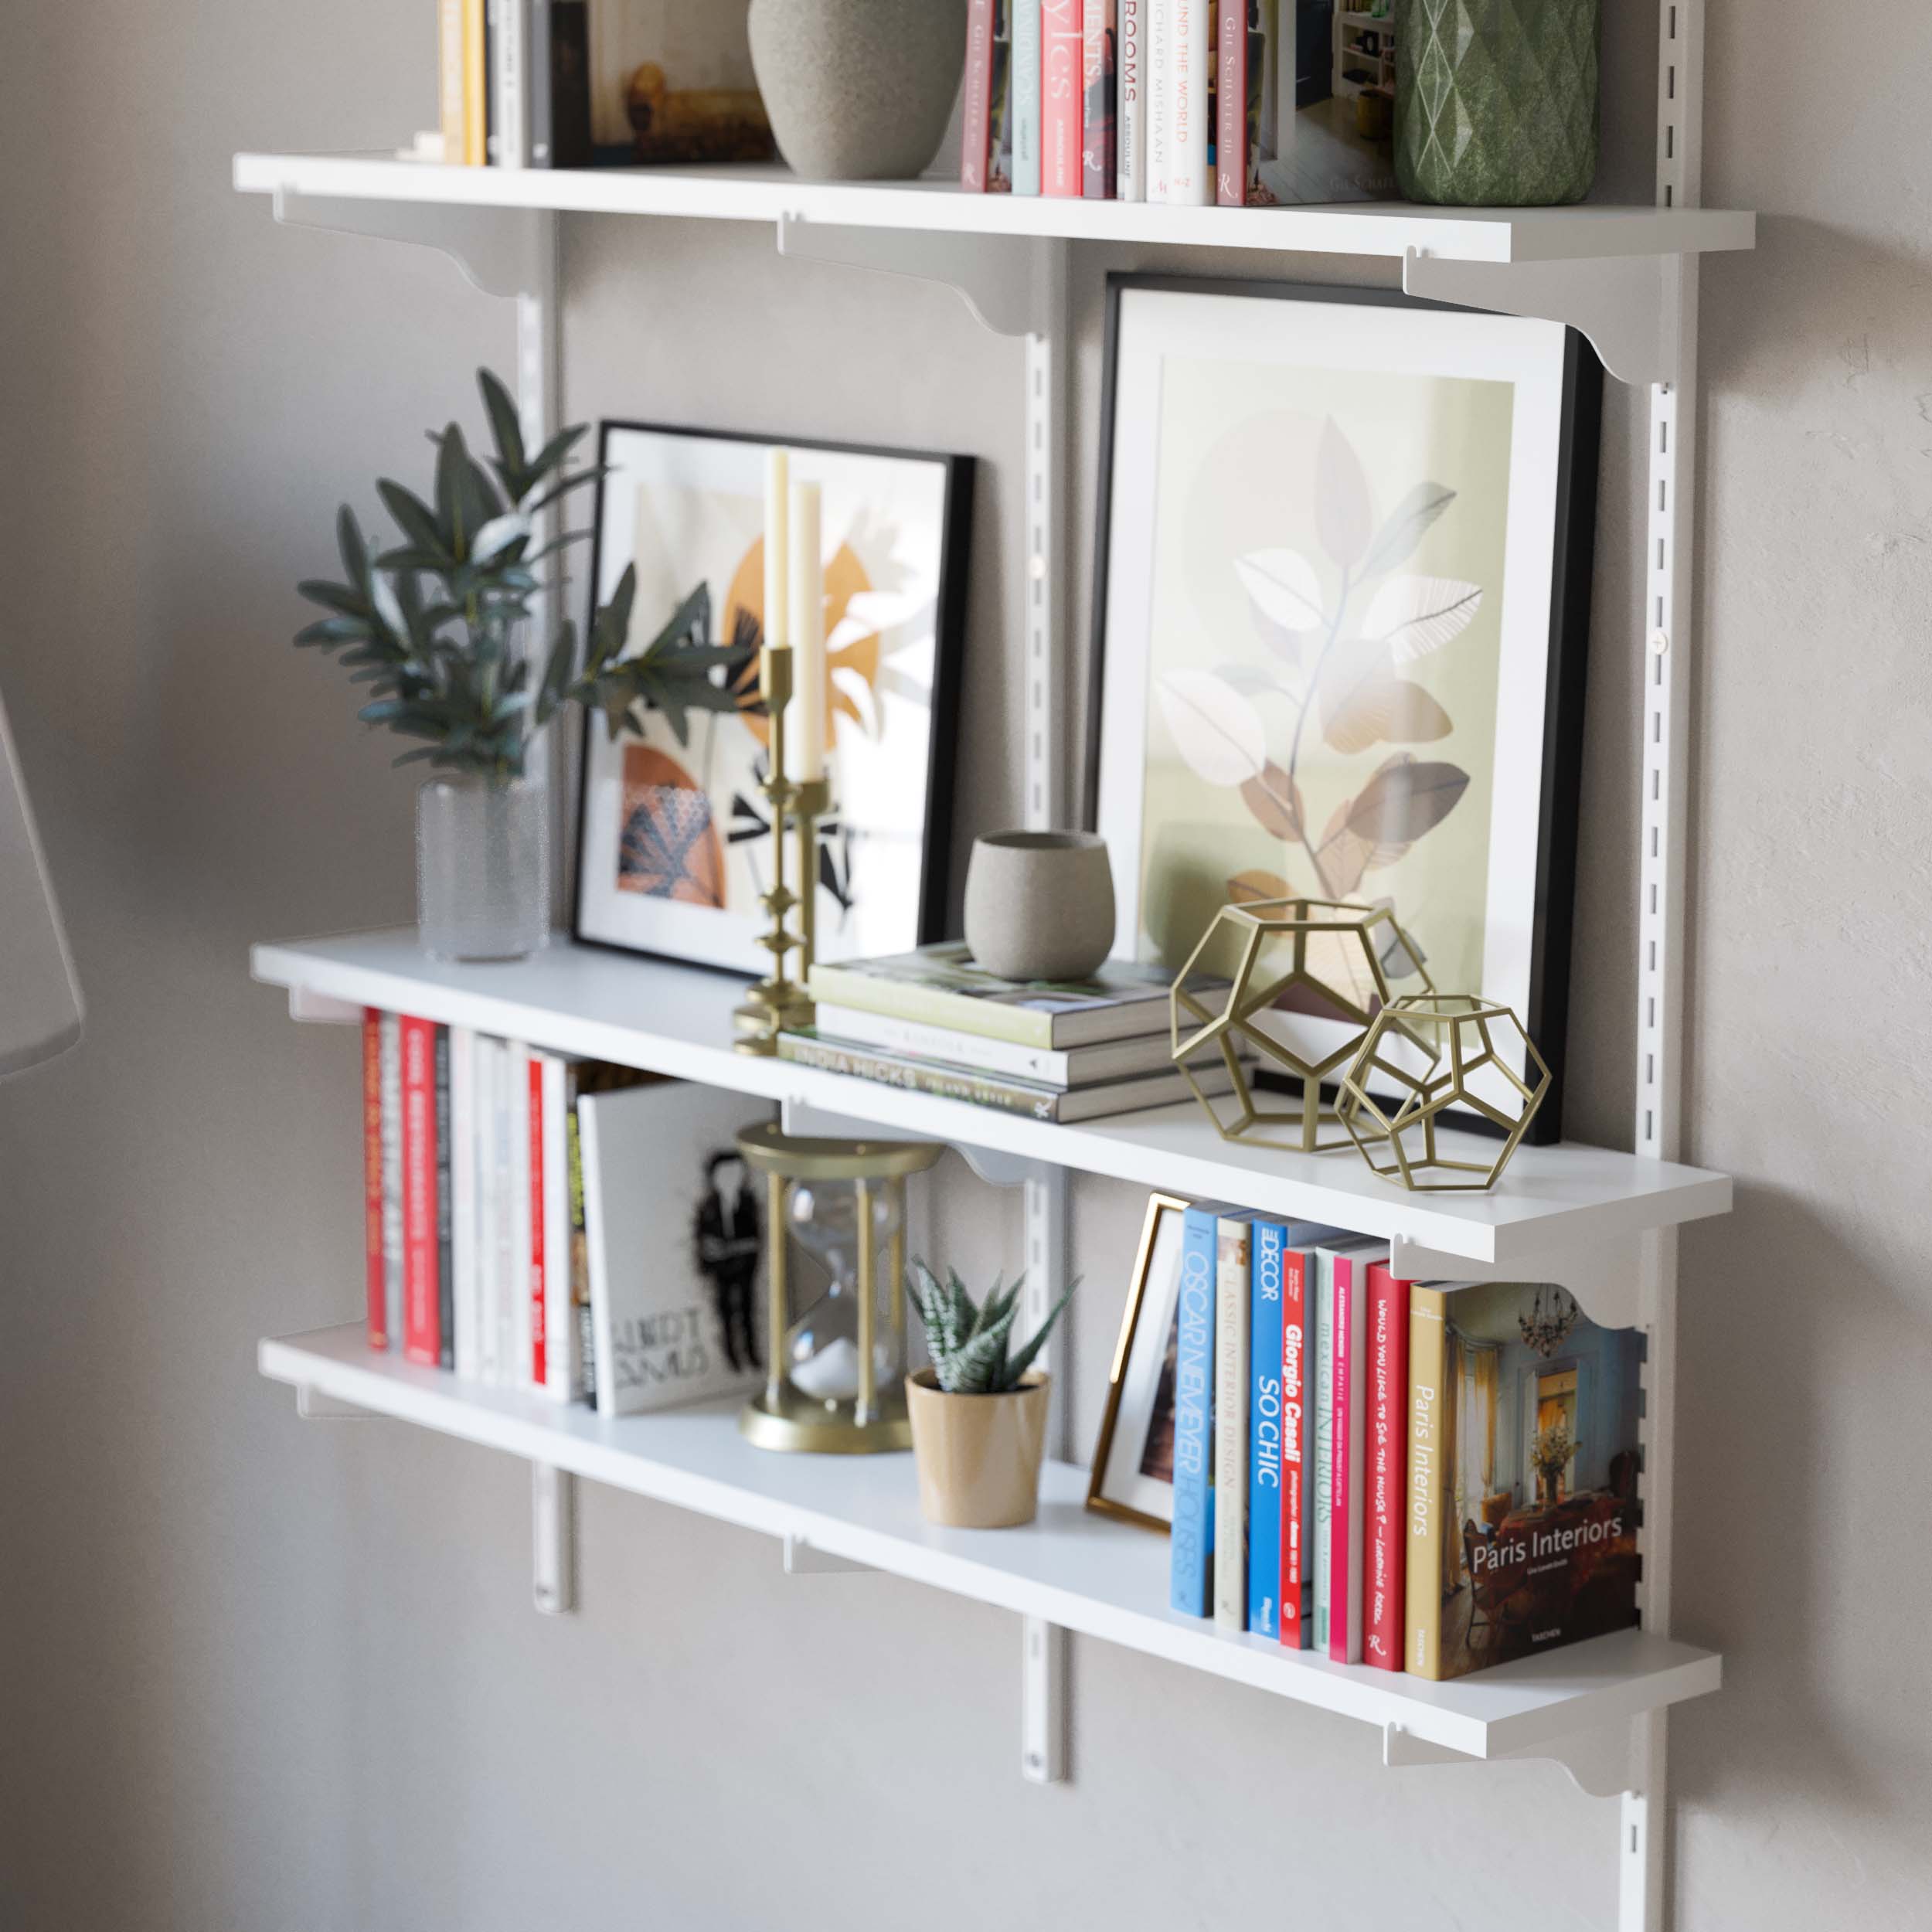 Close-up of white organizer shelves with books, art prints, and houseplants.